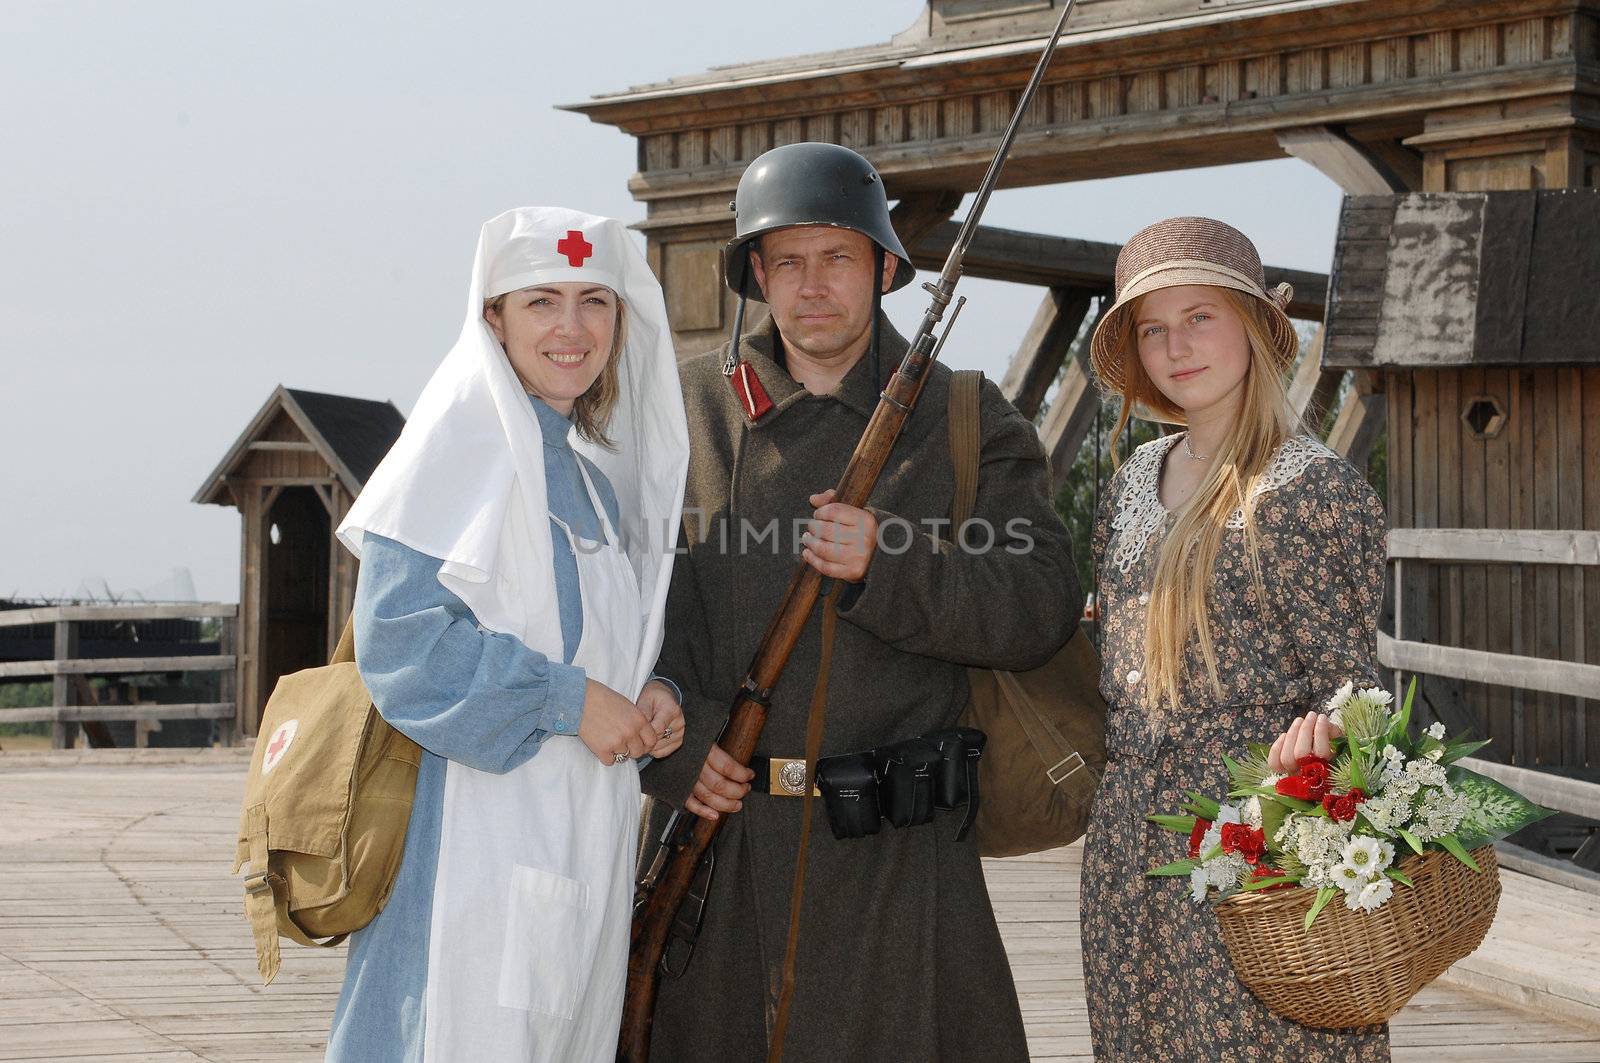 Retro styled picture with two womens and soldier by fotorobs